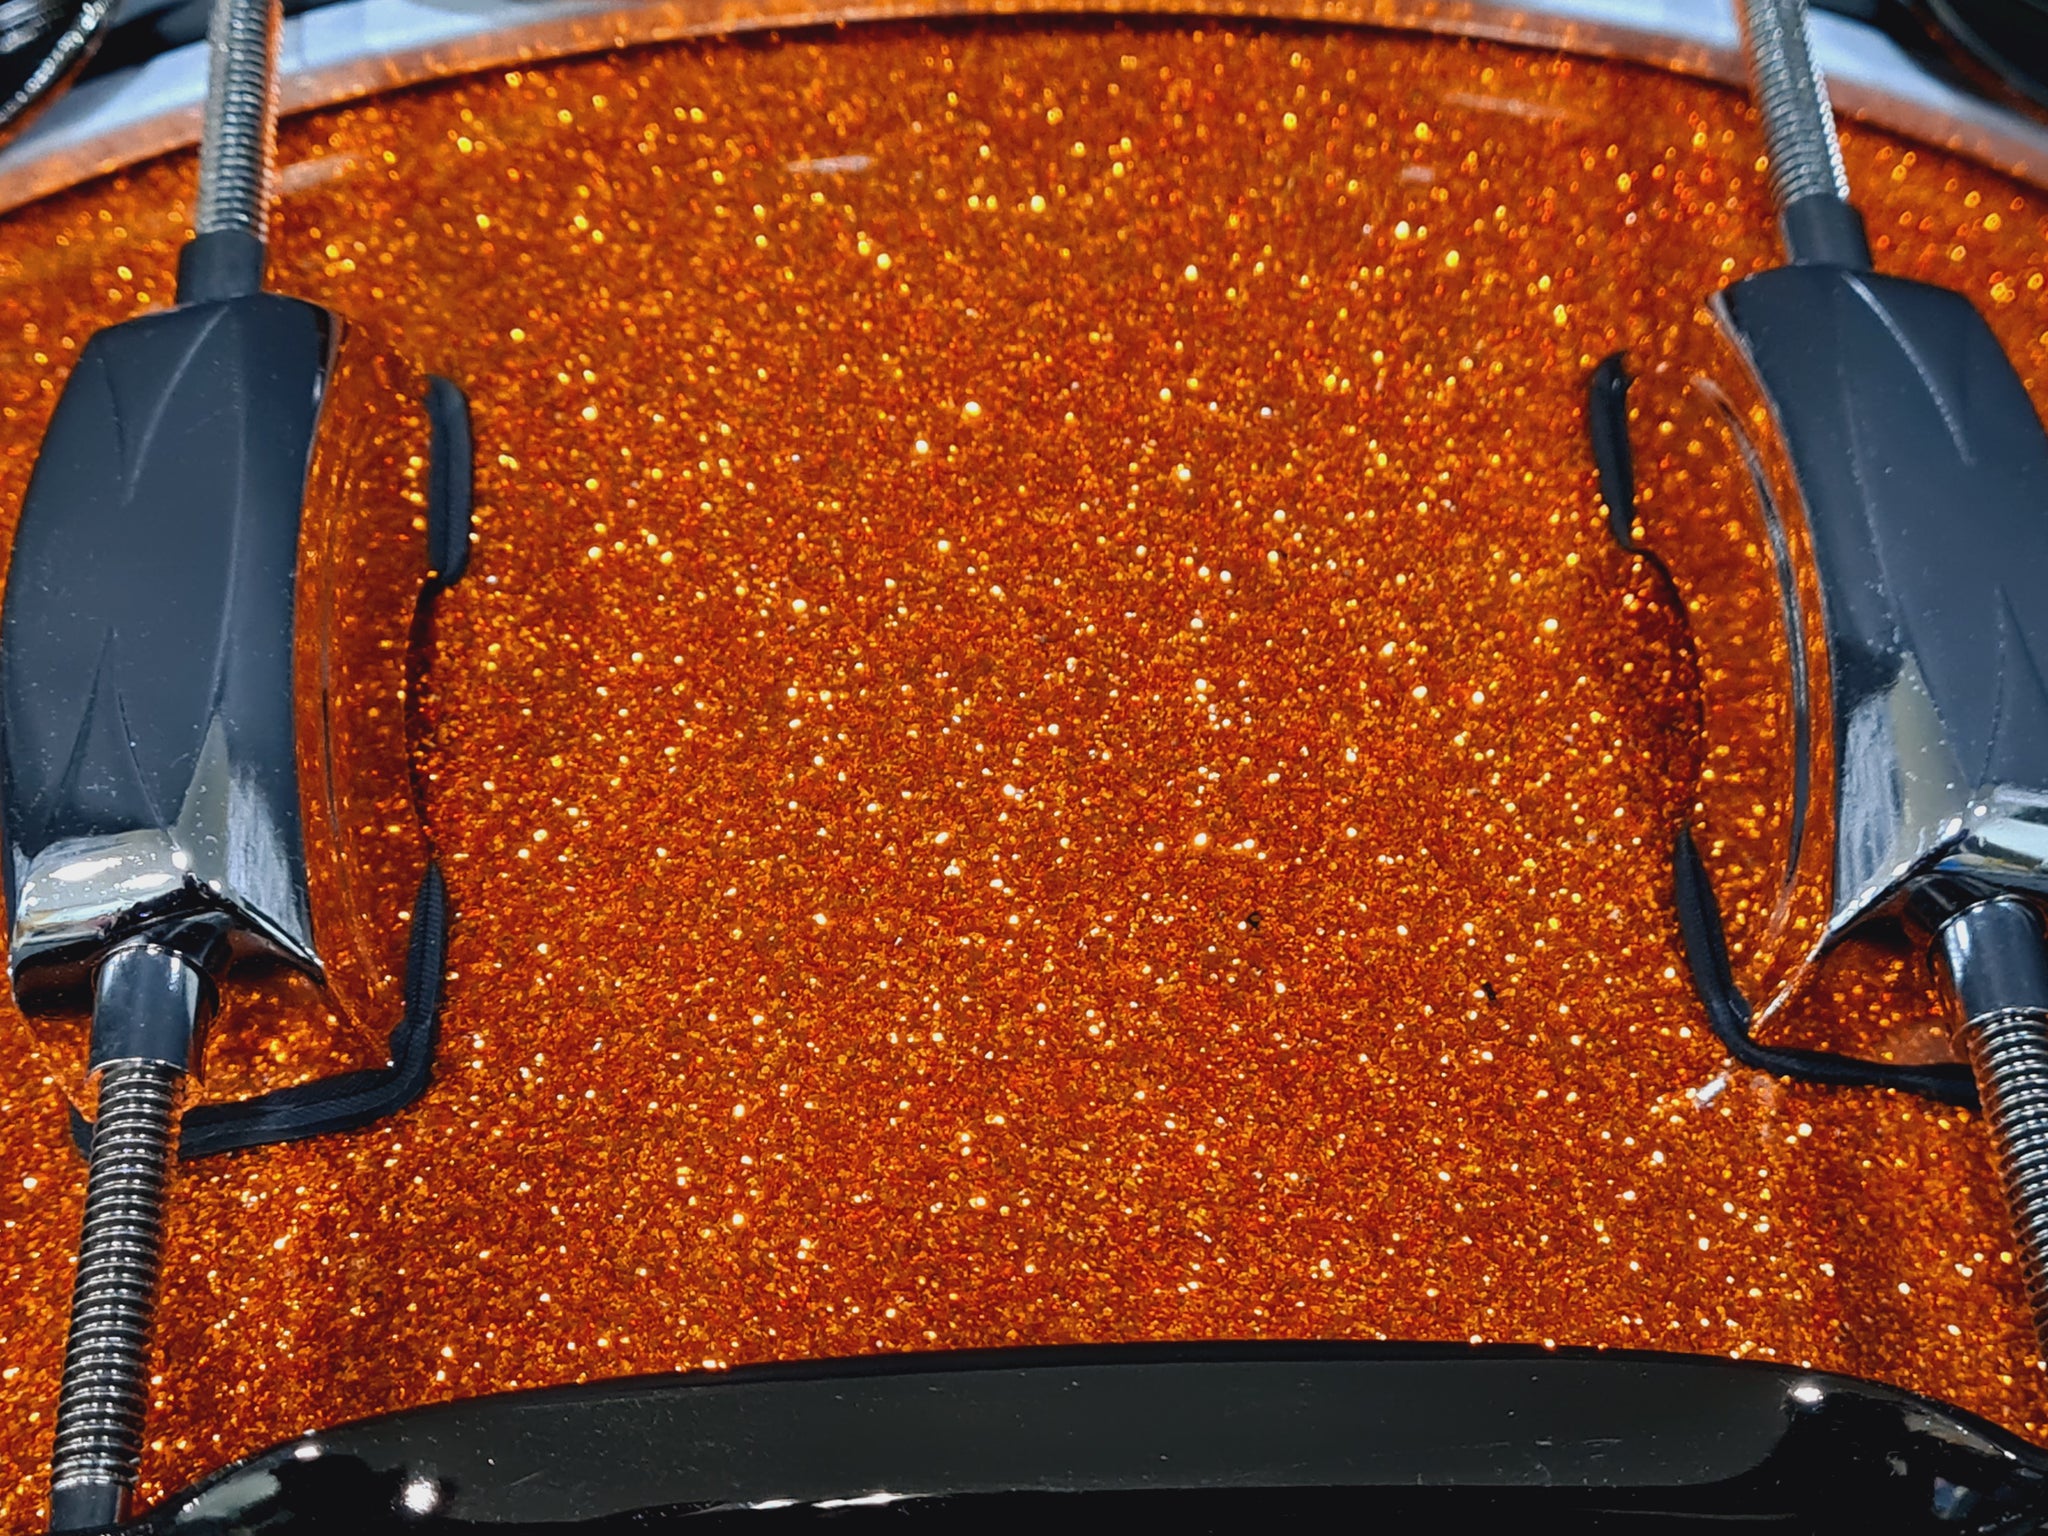 14x5.5" Liberty Drums Snare drum in a stunning orange sparkle lacquer